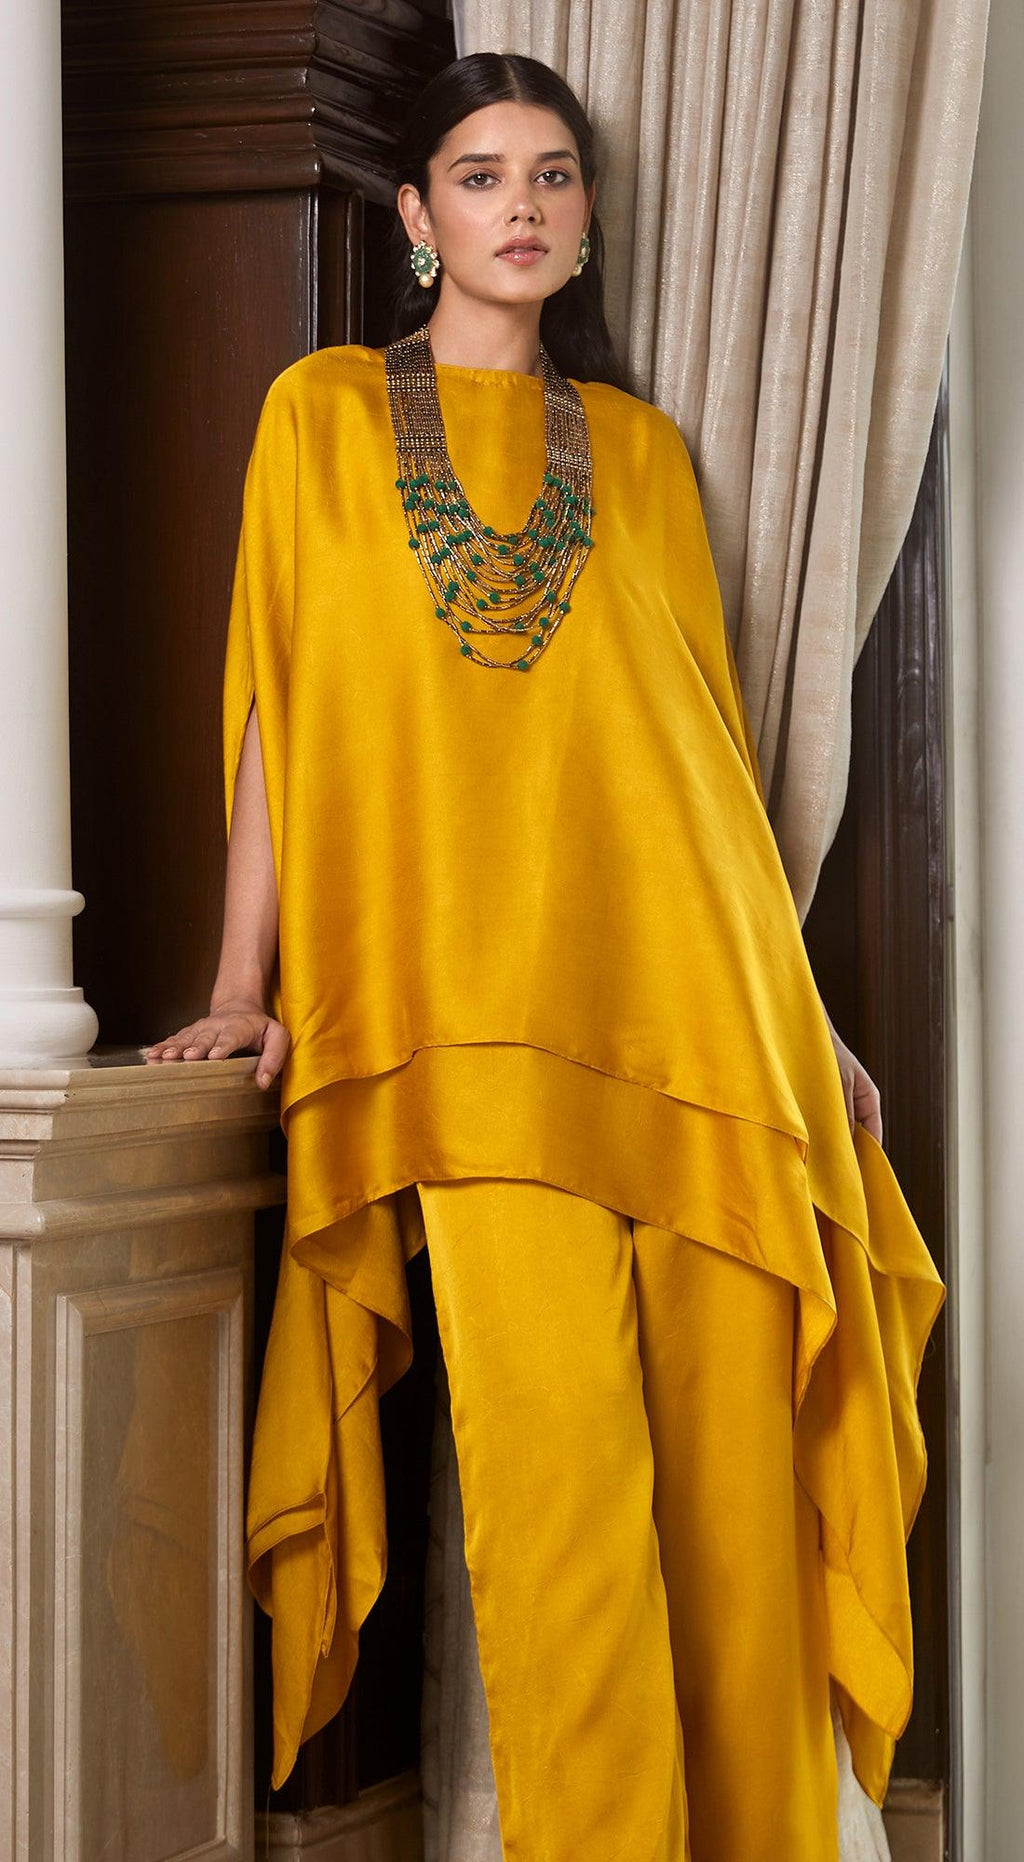 Yellow Co-Ord Set With Necklace - Basanti Kapde aur Koffee